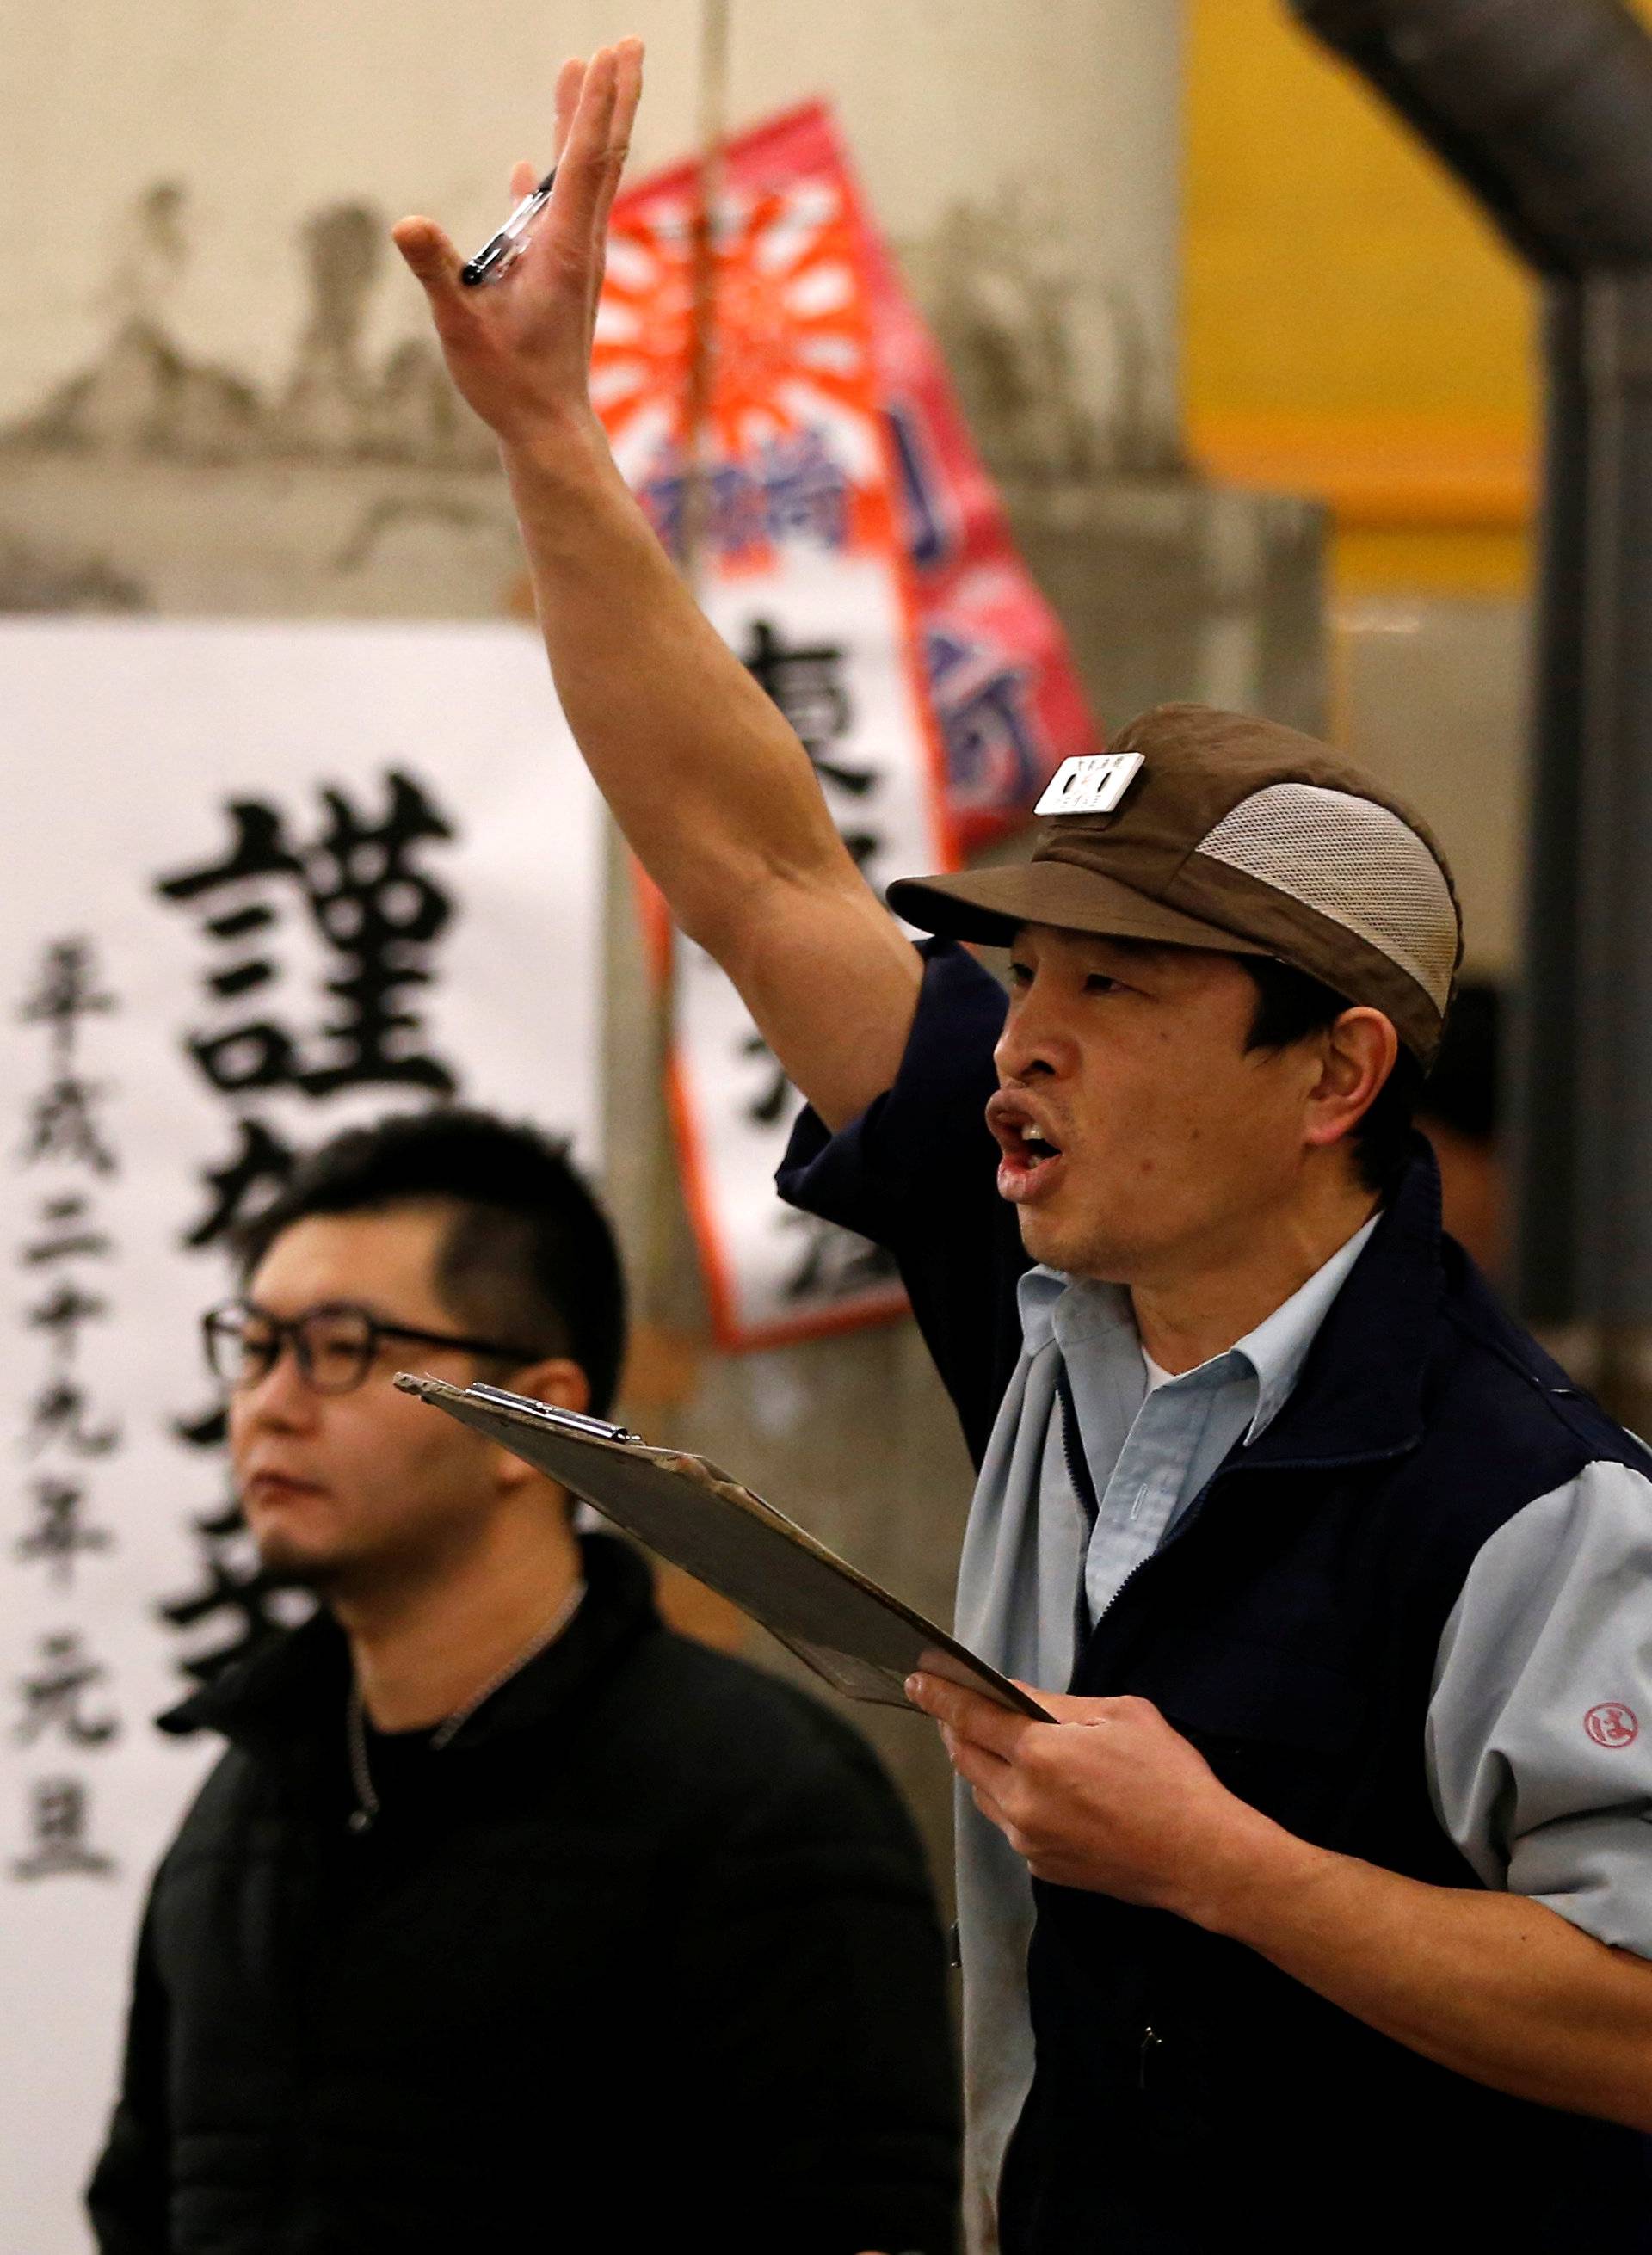 An auctioneer raises his hand as he starts the New Year's auction of the frozen tuna while wholesalers check the quality of frozen tuna displayed at the Tsukiji fish market in Tokyo, Japan